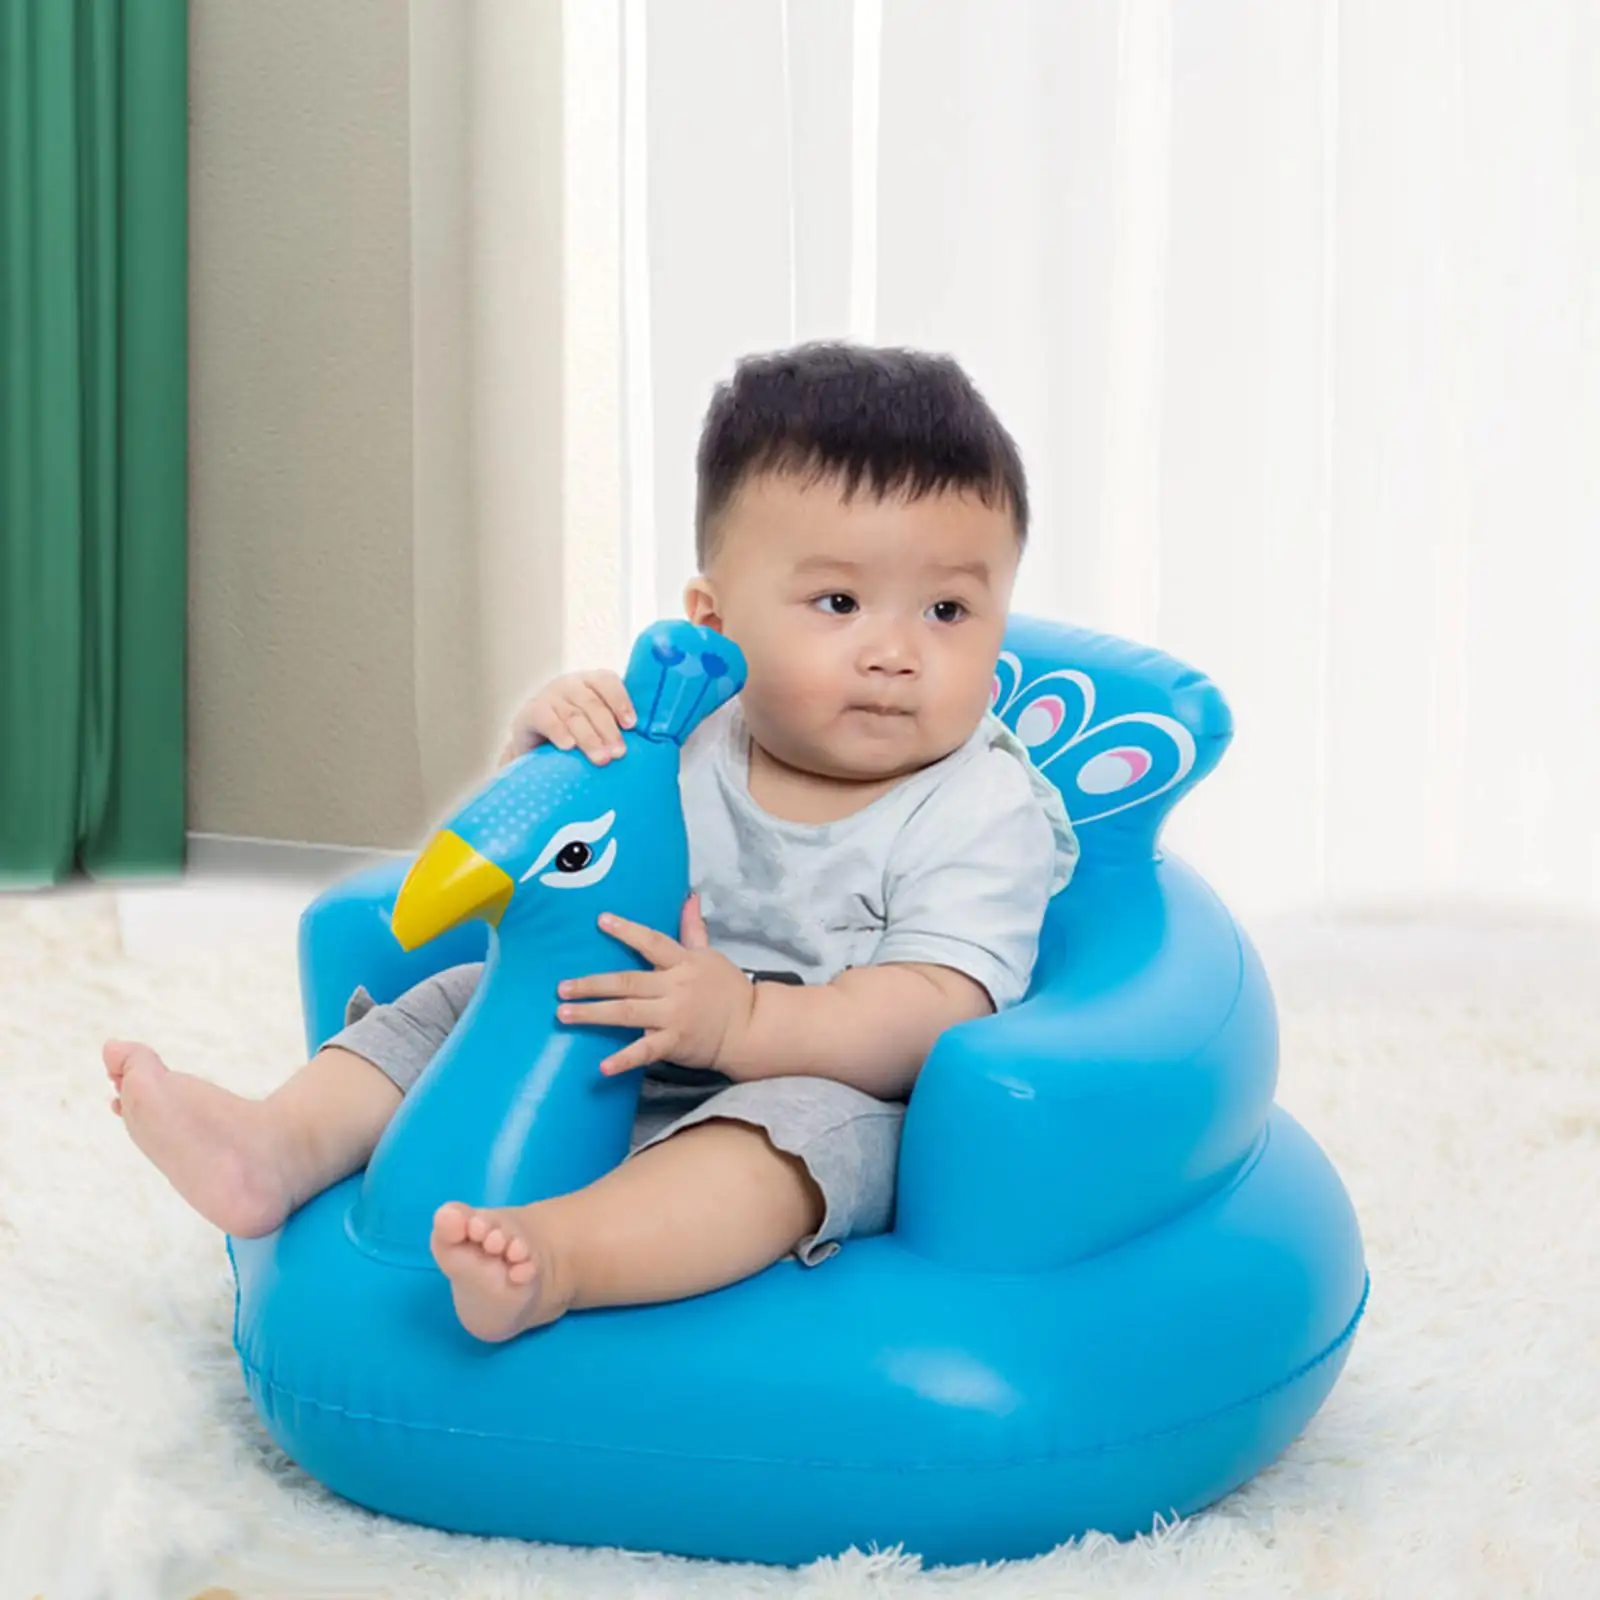 Baby Inflatable Seat Baby Shower Chair Floor Seater Playing Game Toy Toddler Chair for Sitting up Floor Seat Infant Floor Seats